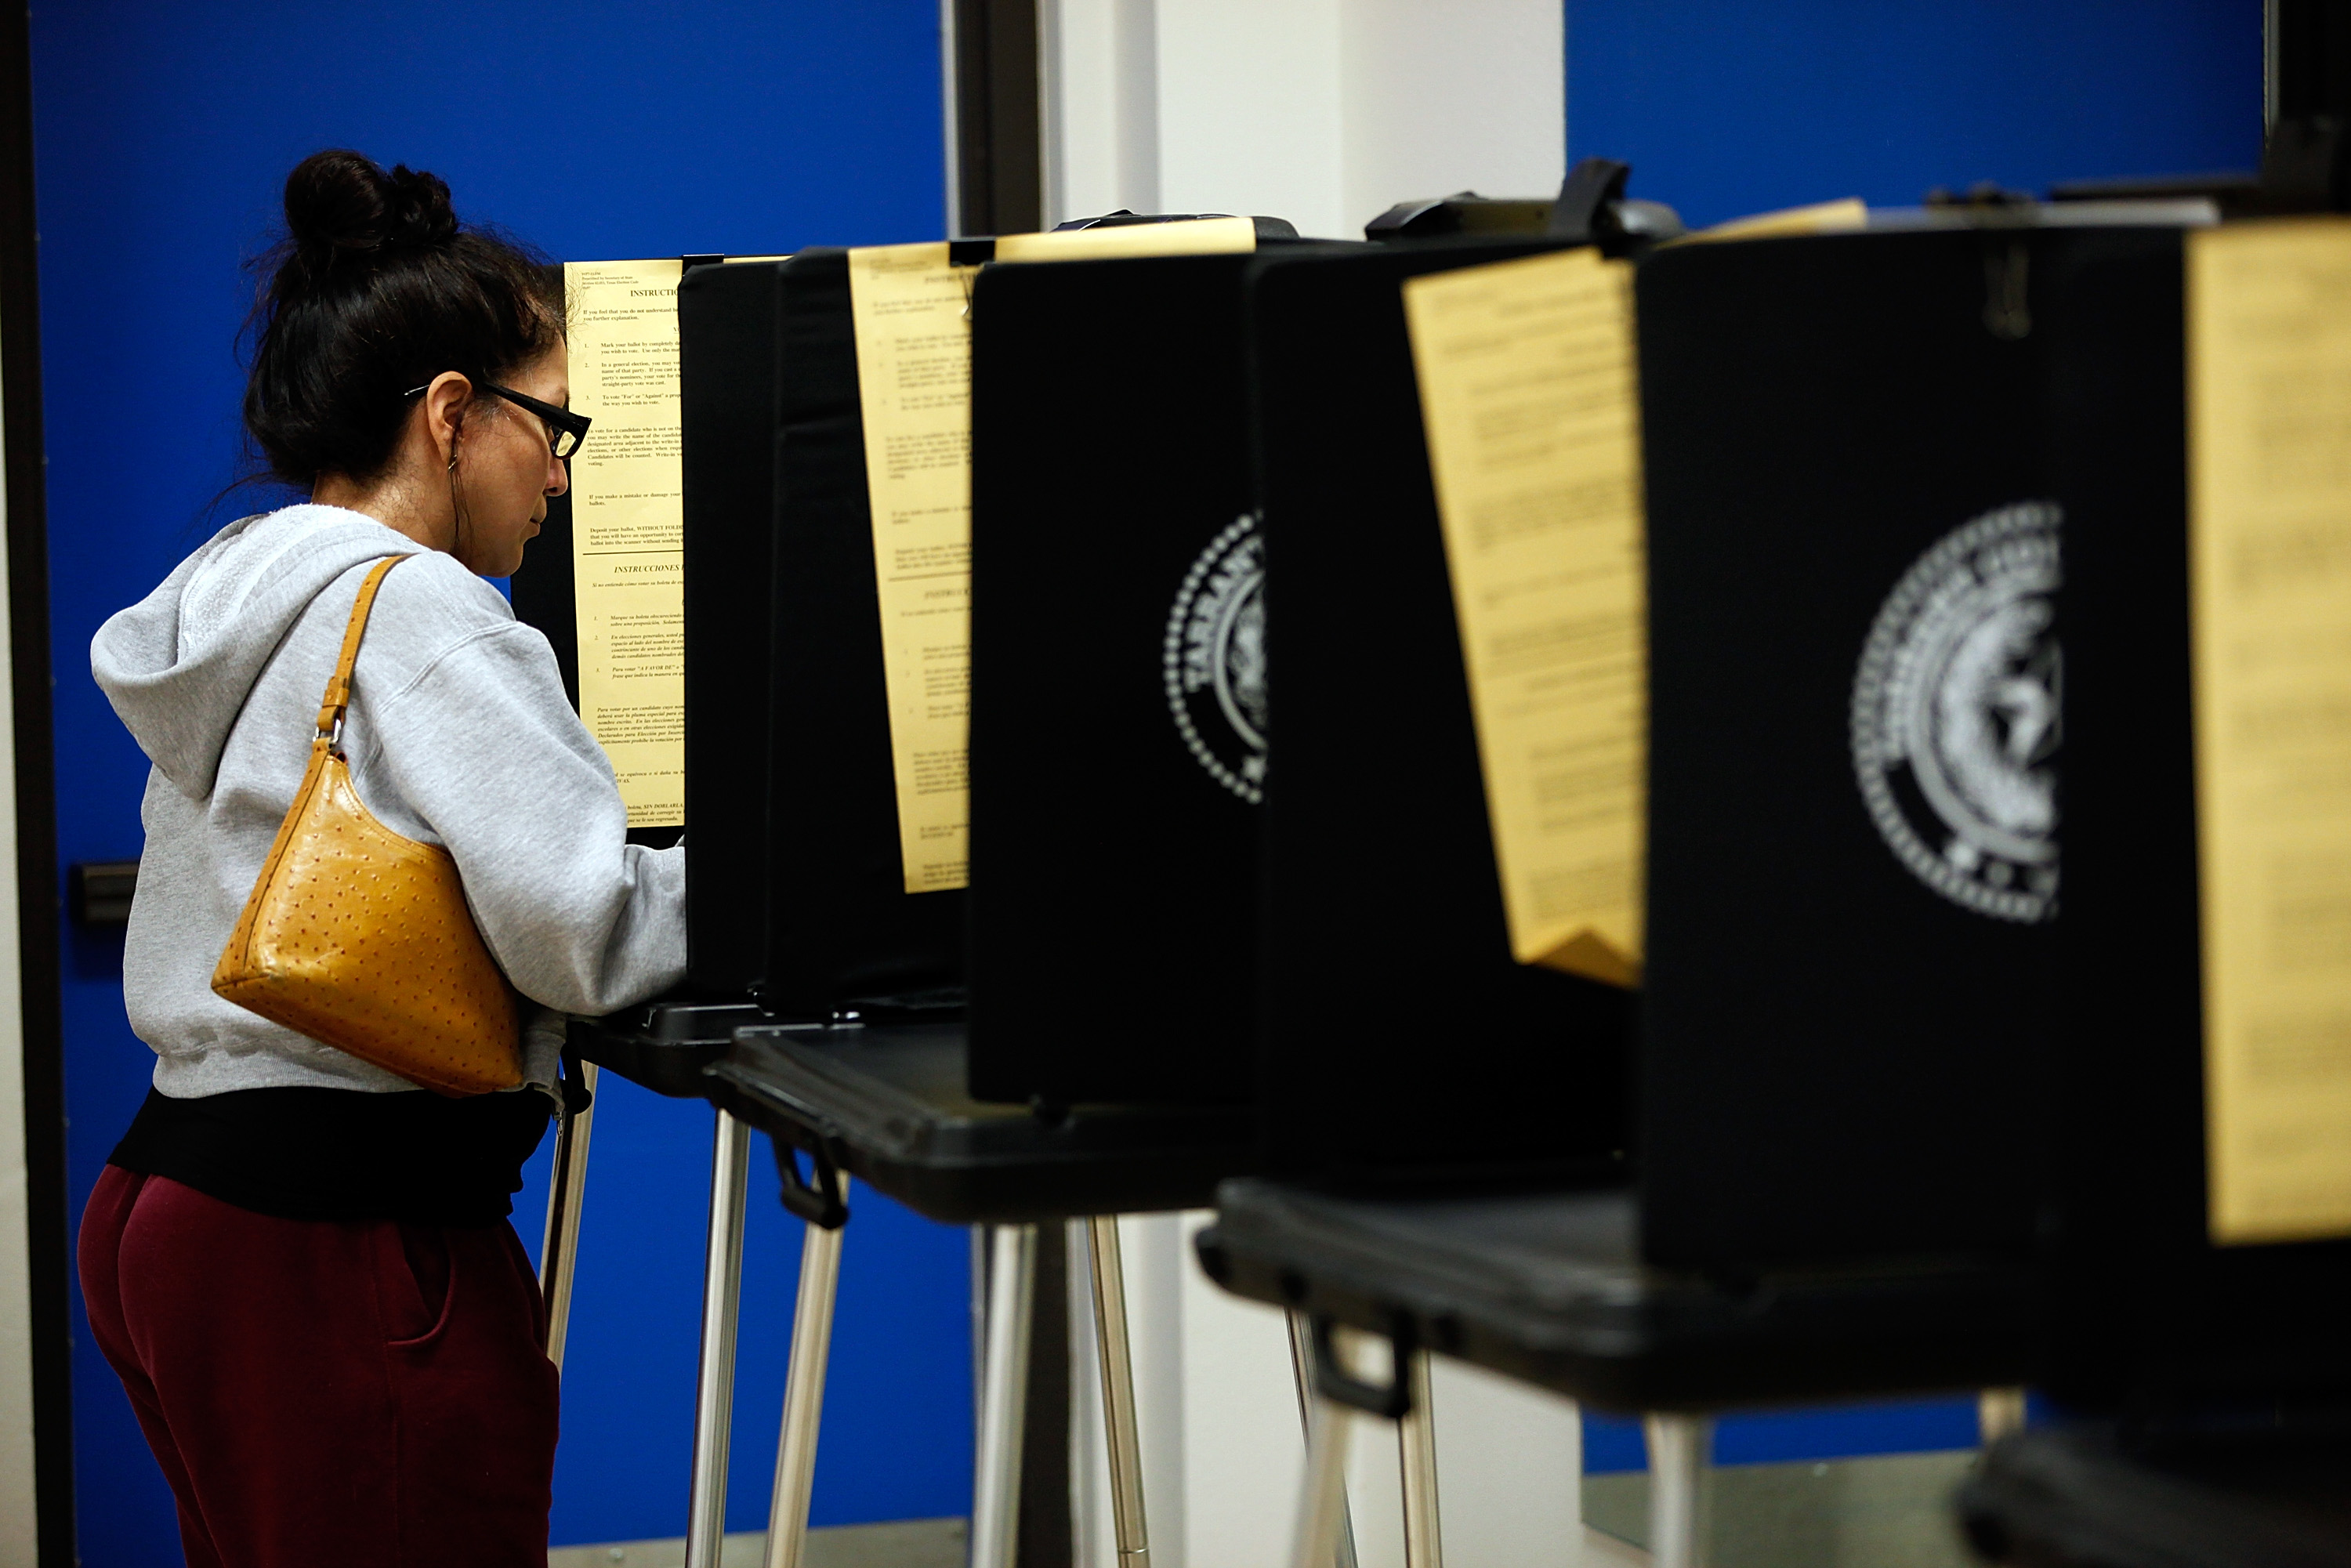 A voter completes her ballot on November 6, 2012 in Fort Worth, Texas. (Tom Pennington—Getty Images)